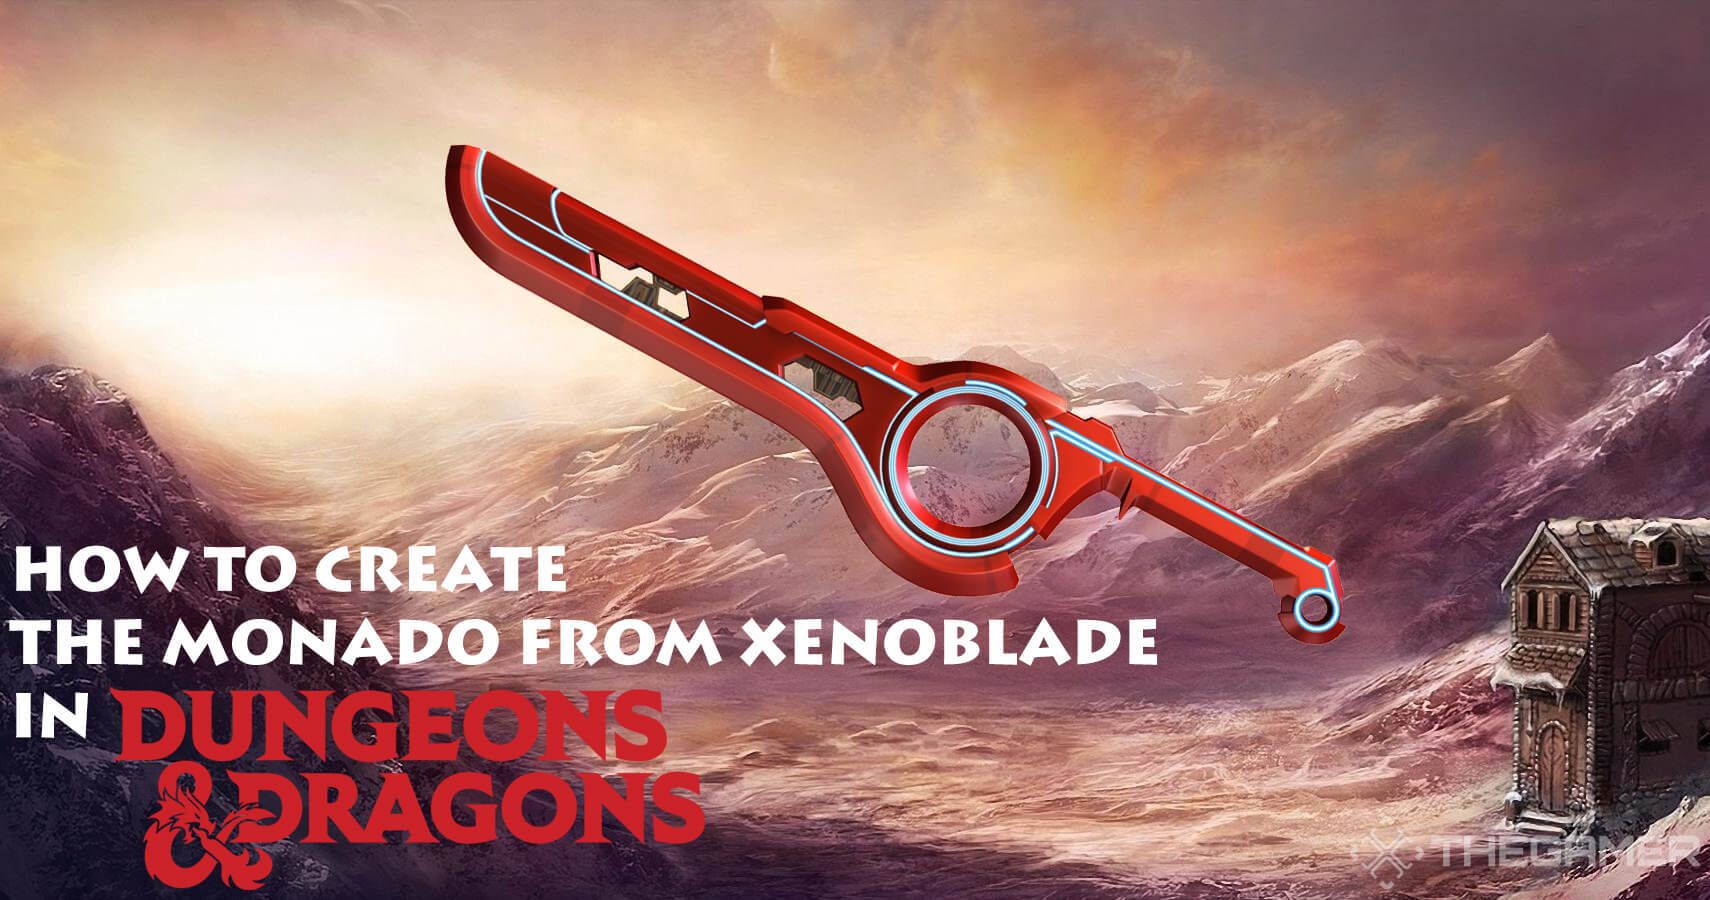 How To Create The Monado From Xenoblade In Dungeons & Dragons